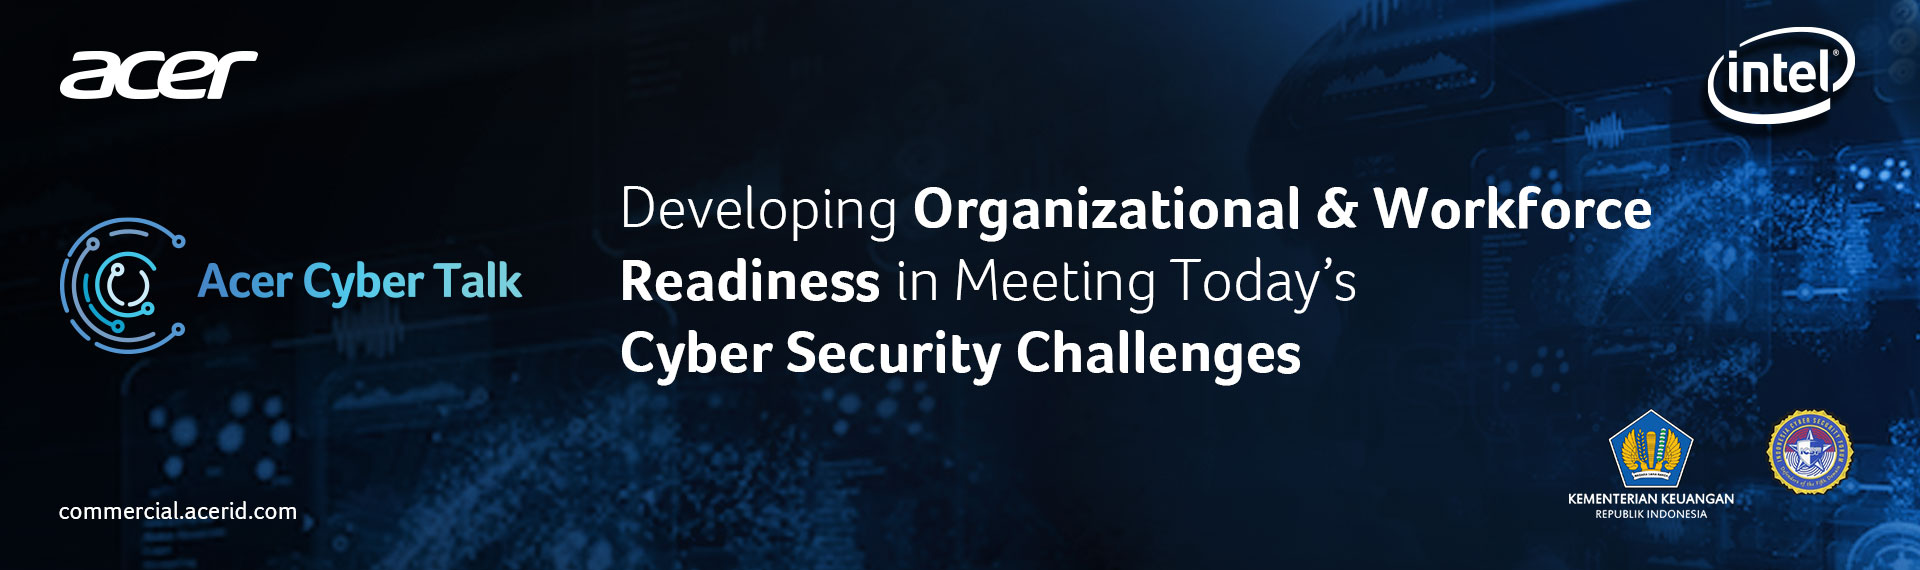 Webinar Acer Cyber Talk, “Developing Organizational & Workforce Readiness in Meeting Today’s Cyber Security Challenges”. Daftar Sekarang!